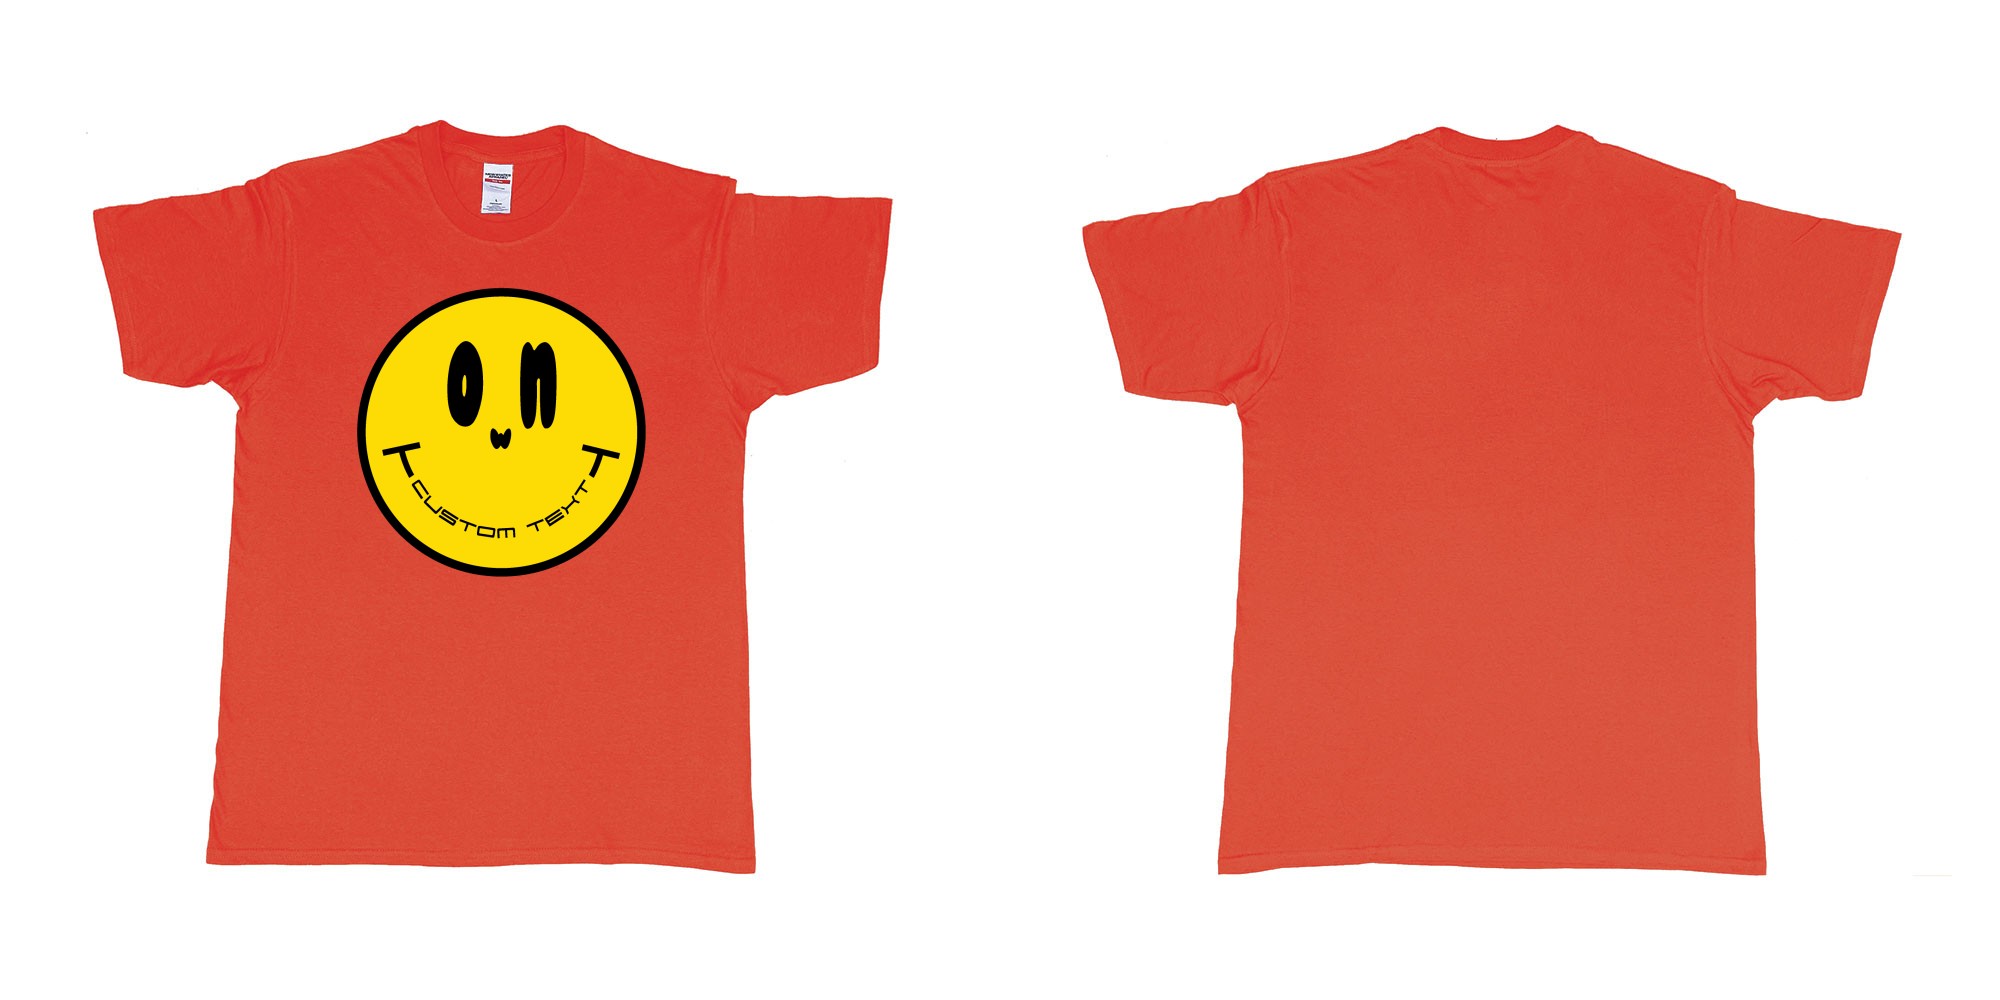 Custom tshirt design smiley face emoji custom text in fabric color red choice your own text made in Bali by The Pirate Way